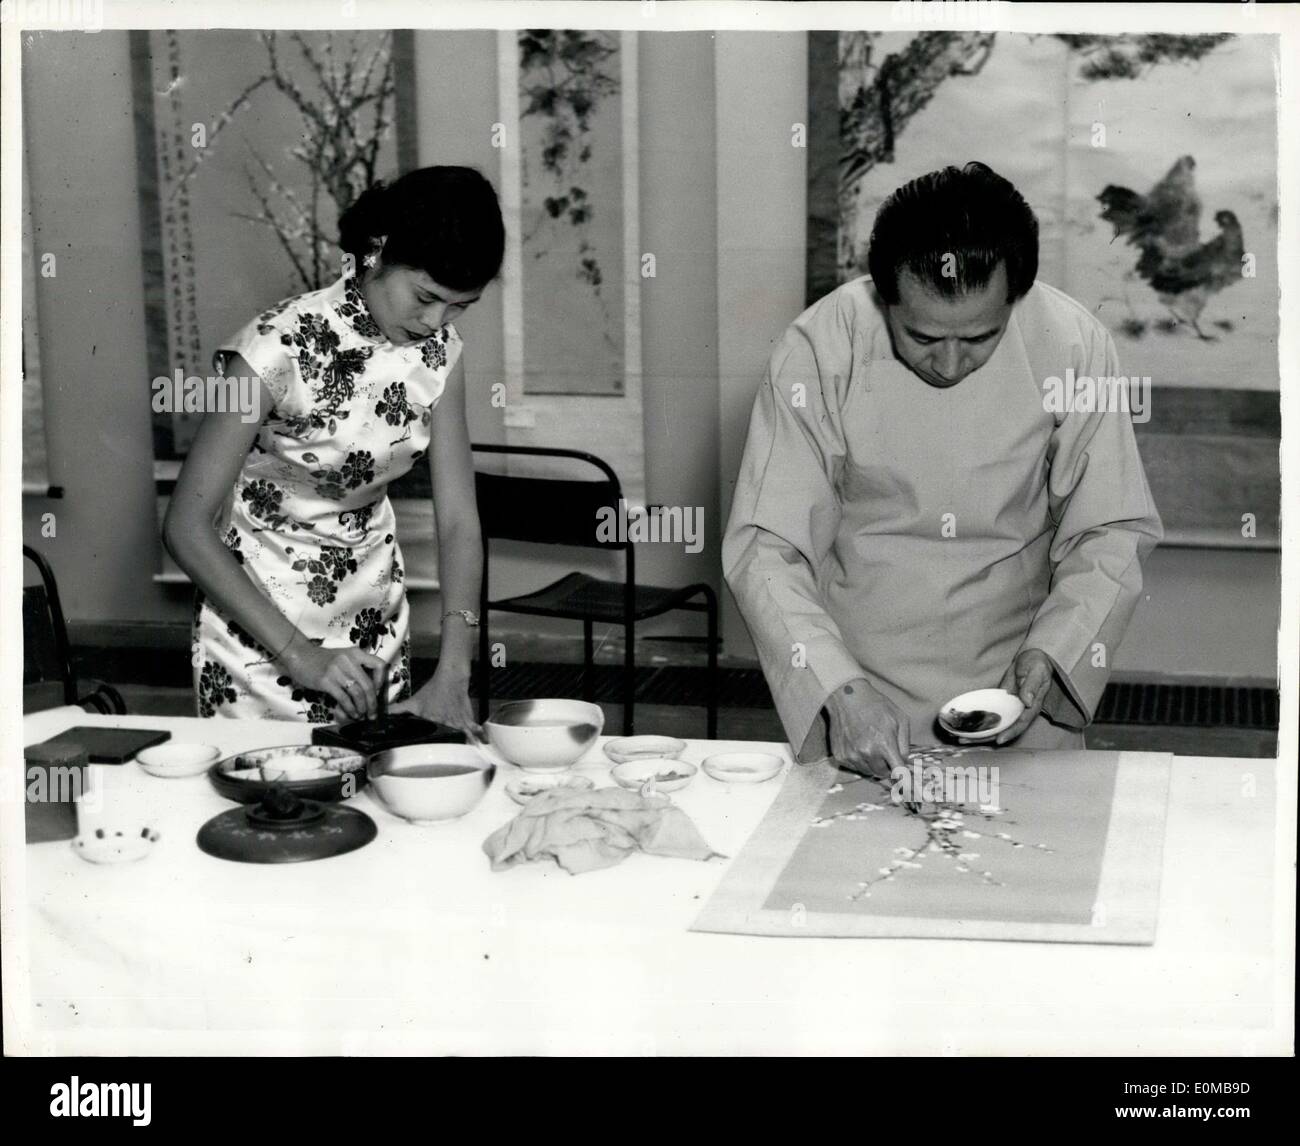 Jul. 08, 1954 - Exhibition Of Chinese Finger Painting: An exhibition of TSE-HUA (Chinese finger painting) by the Singapore artist, WU TSAI YEN, opens tomorrow at the Imperial Institute, South Kensington. So far as is known, this is the first exhibition and demonstration in this country, or indeed, of any western country, of a very ancient Chinese art of which today there are a few accomplish exponents. Mr. Wu is, in fact, probably the only artist in the world who paints exclusively by this method Stock Photo